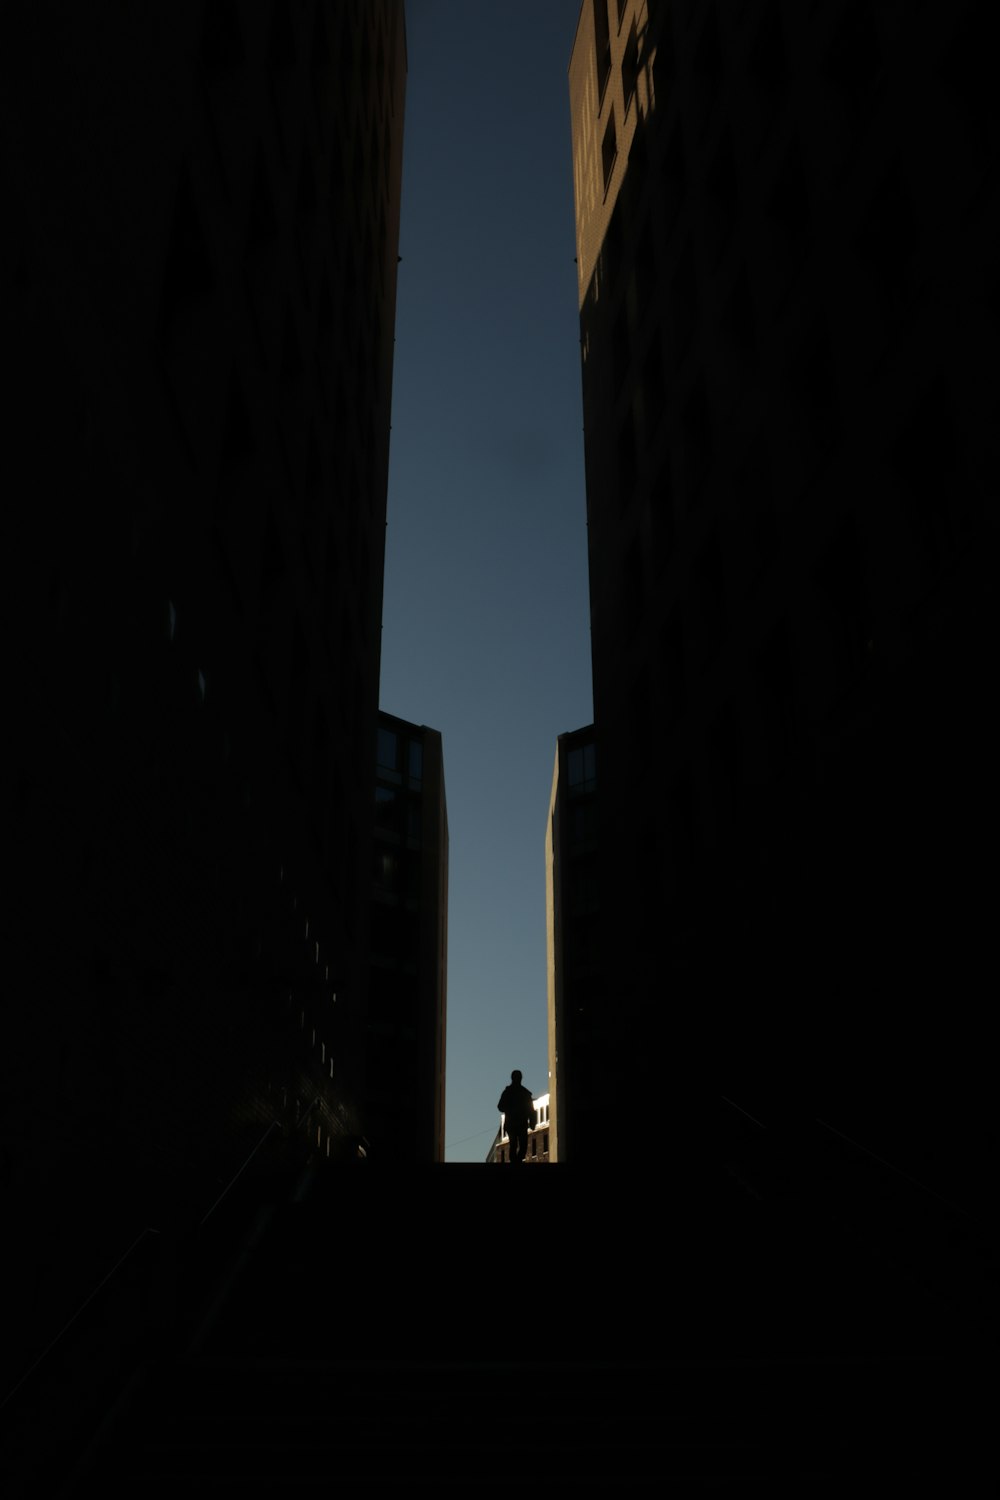 silhouette of people walking on street during night time